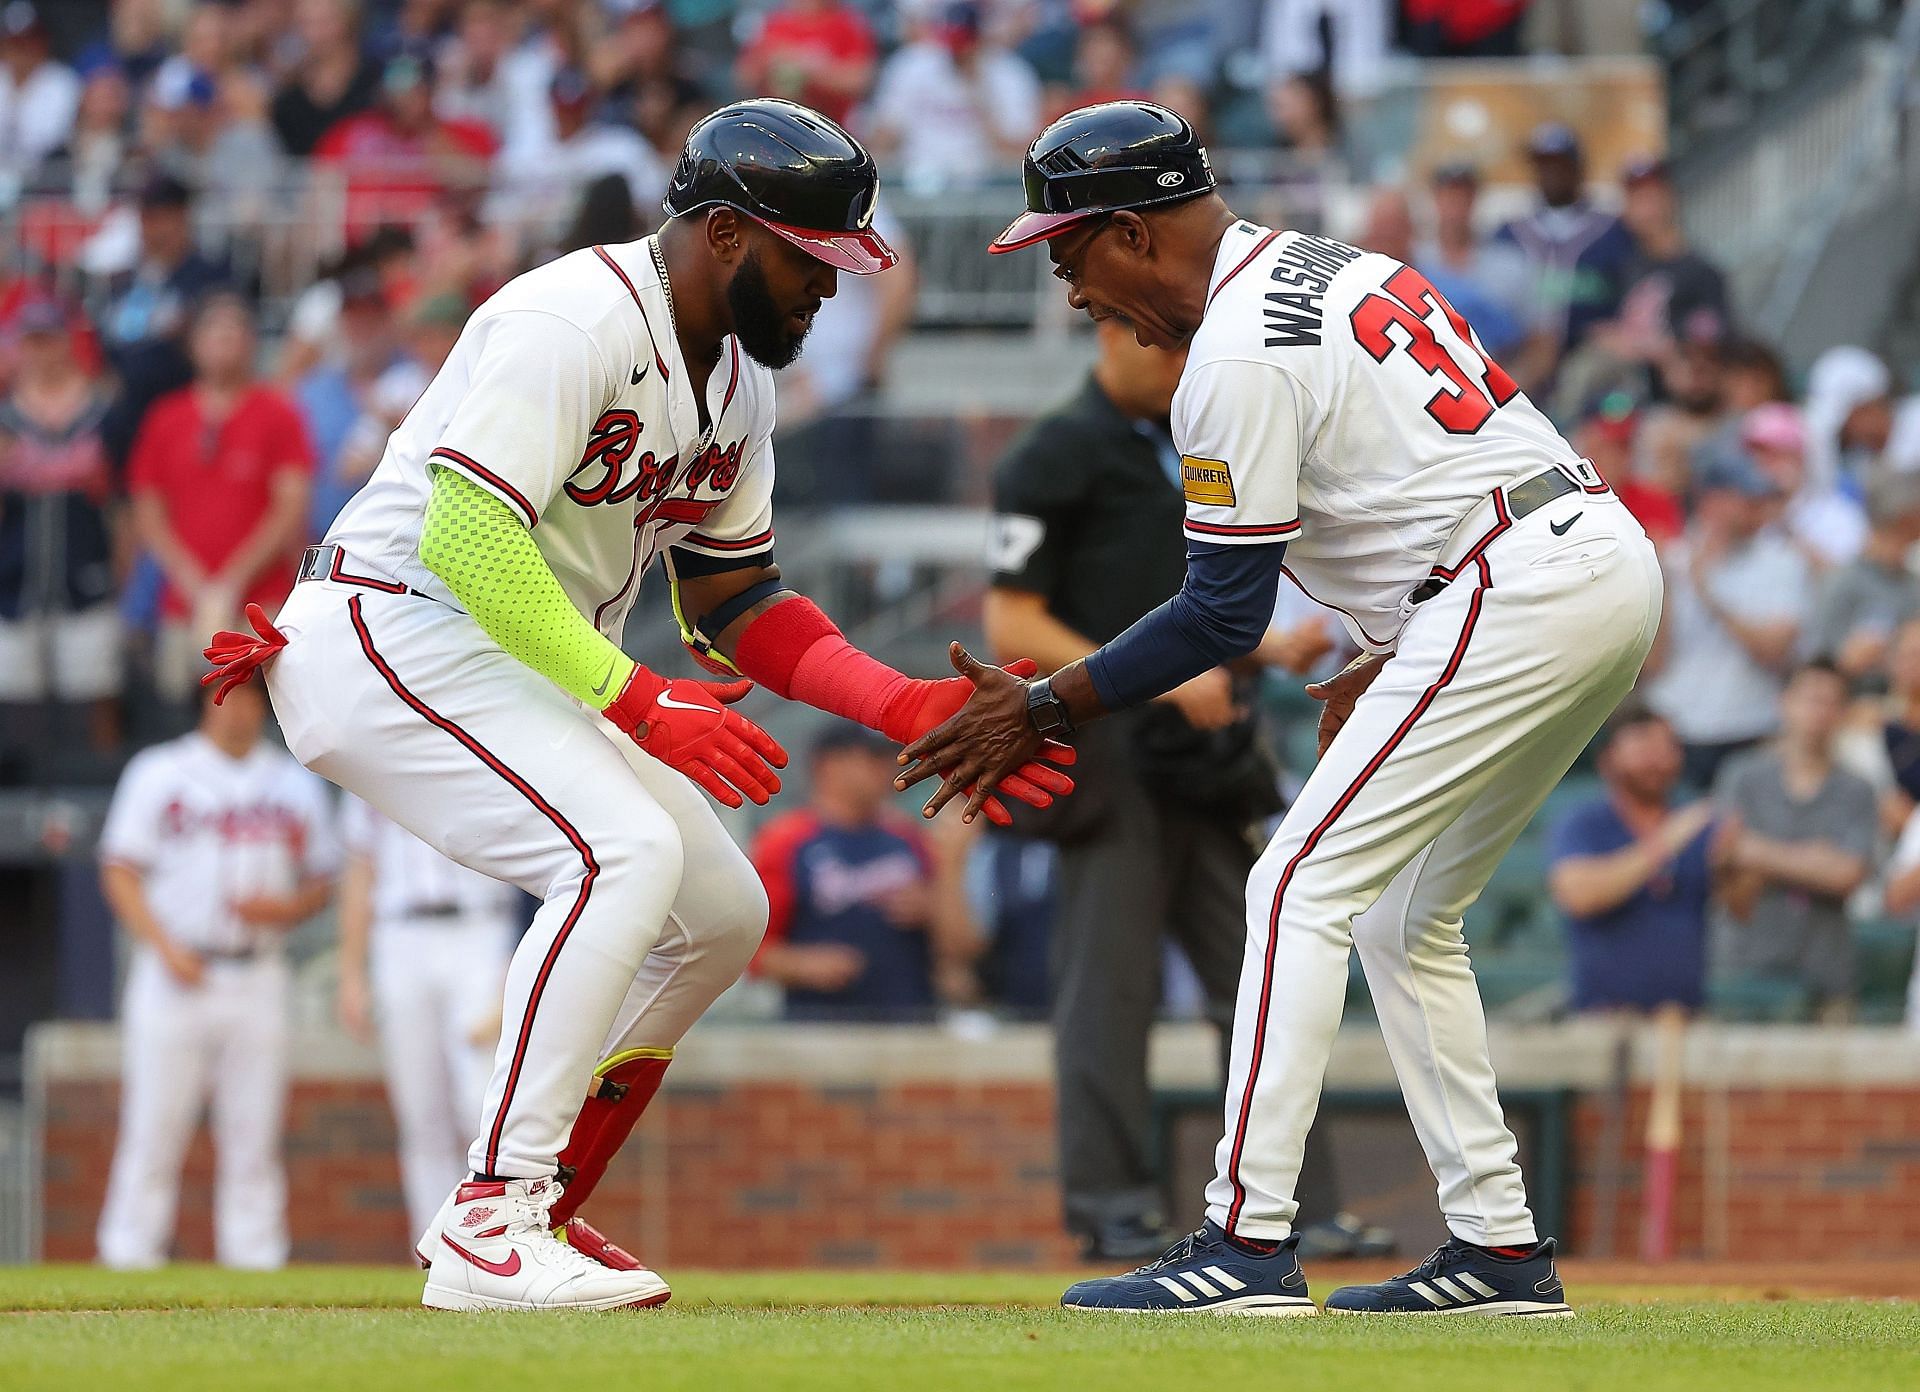 What is the origin of the Ozuna from the Braves comment? Fan's